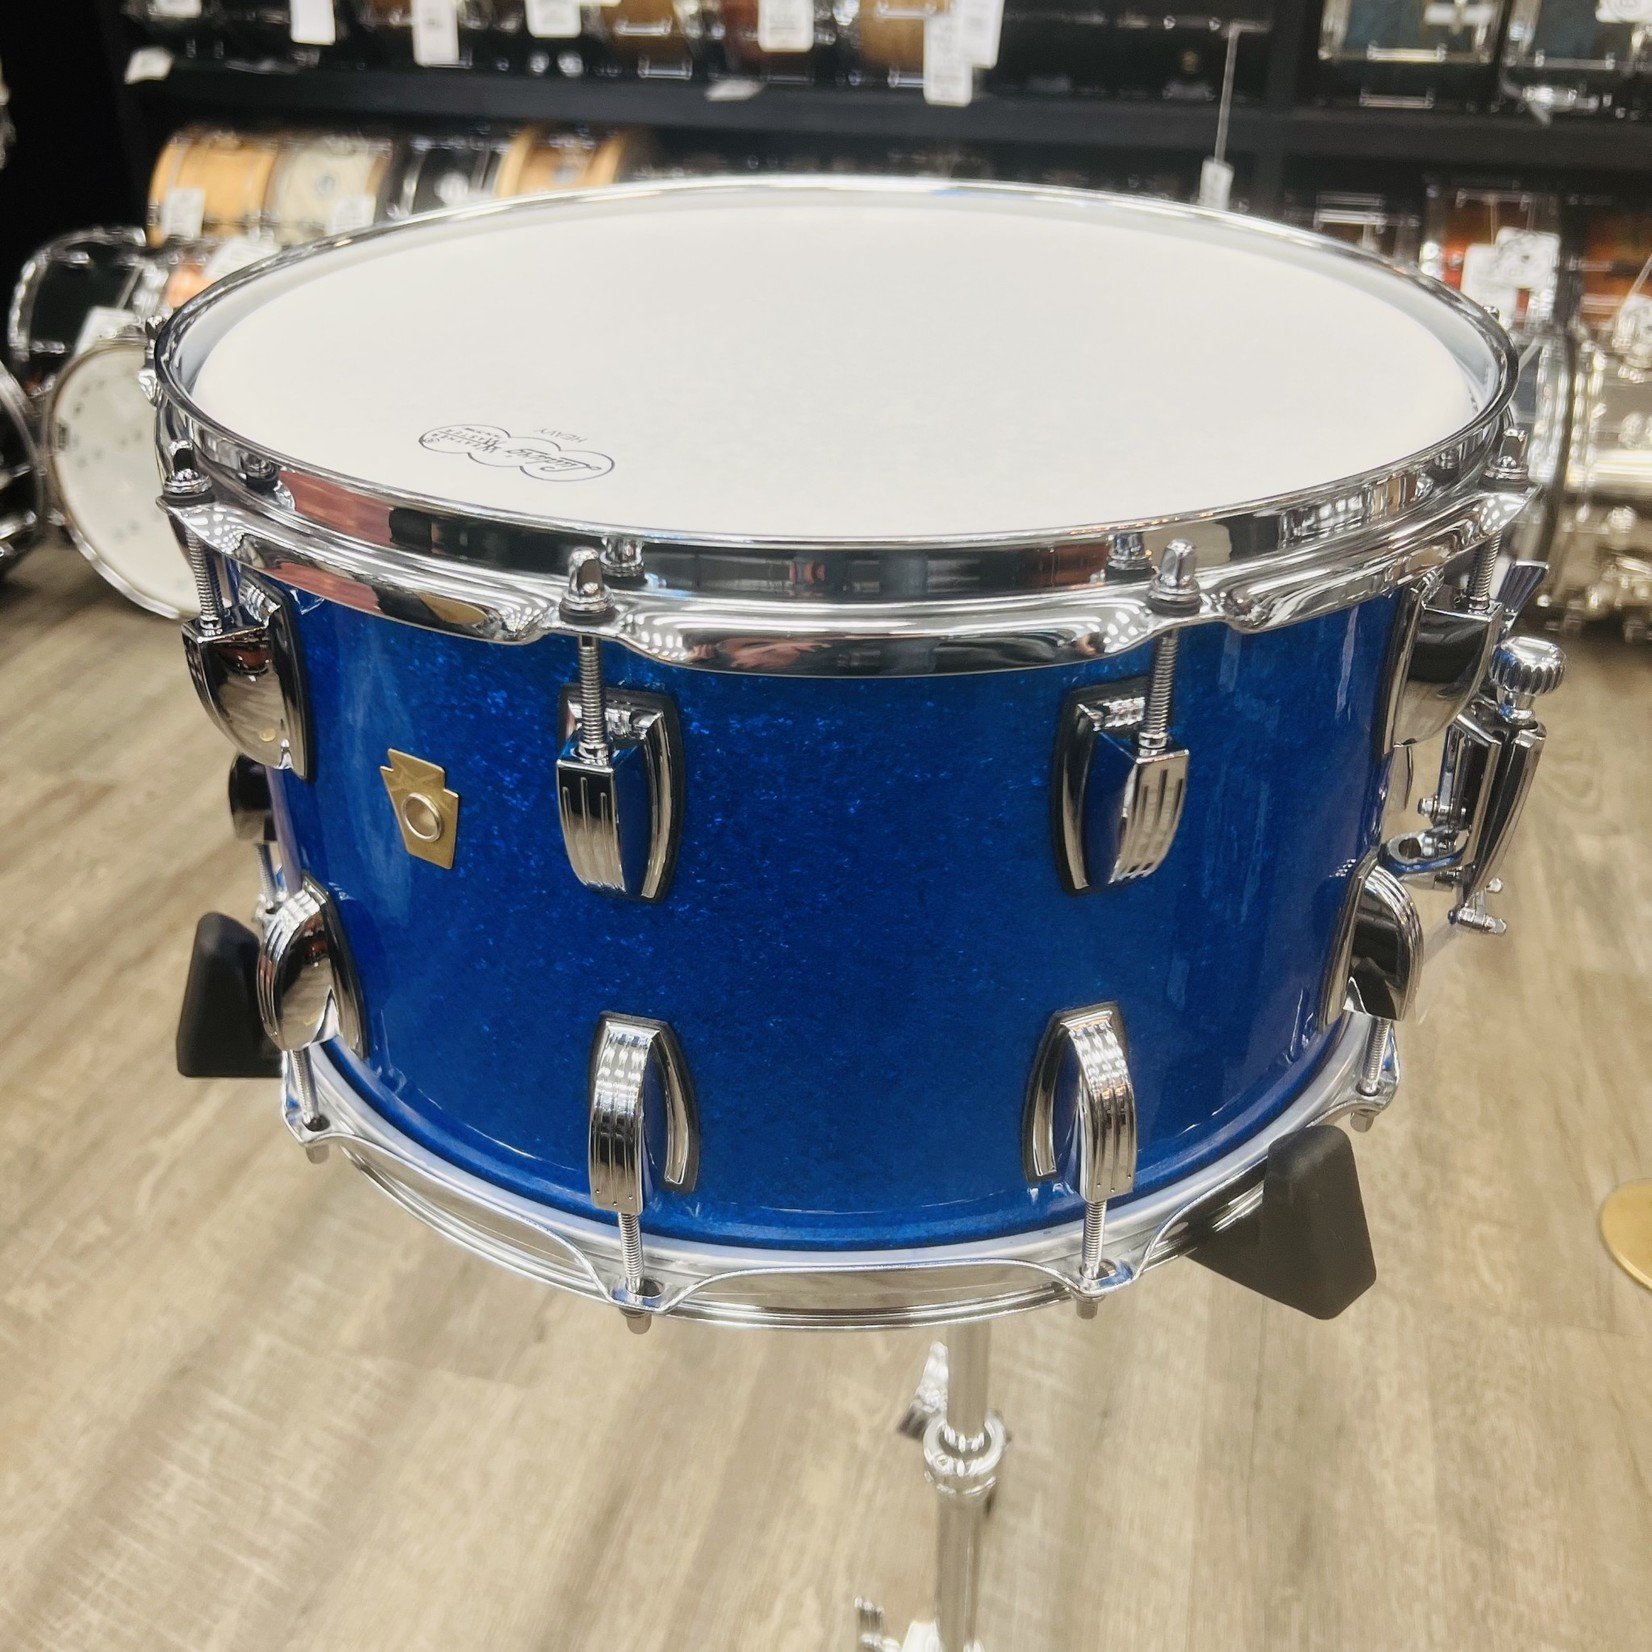 Ludwig Ludwig Legacy Mahogany 8x14" Snare Drum (Blue Sparkle)